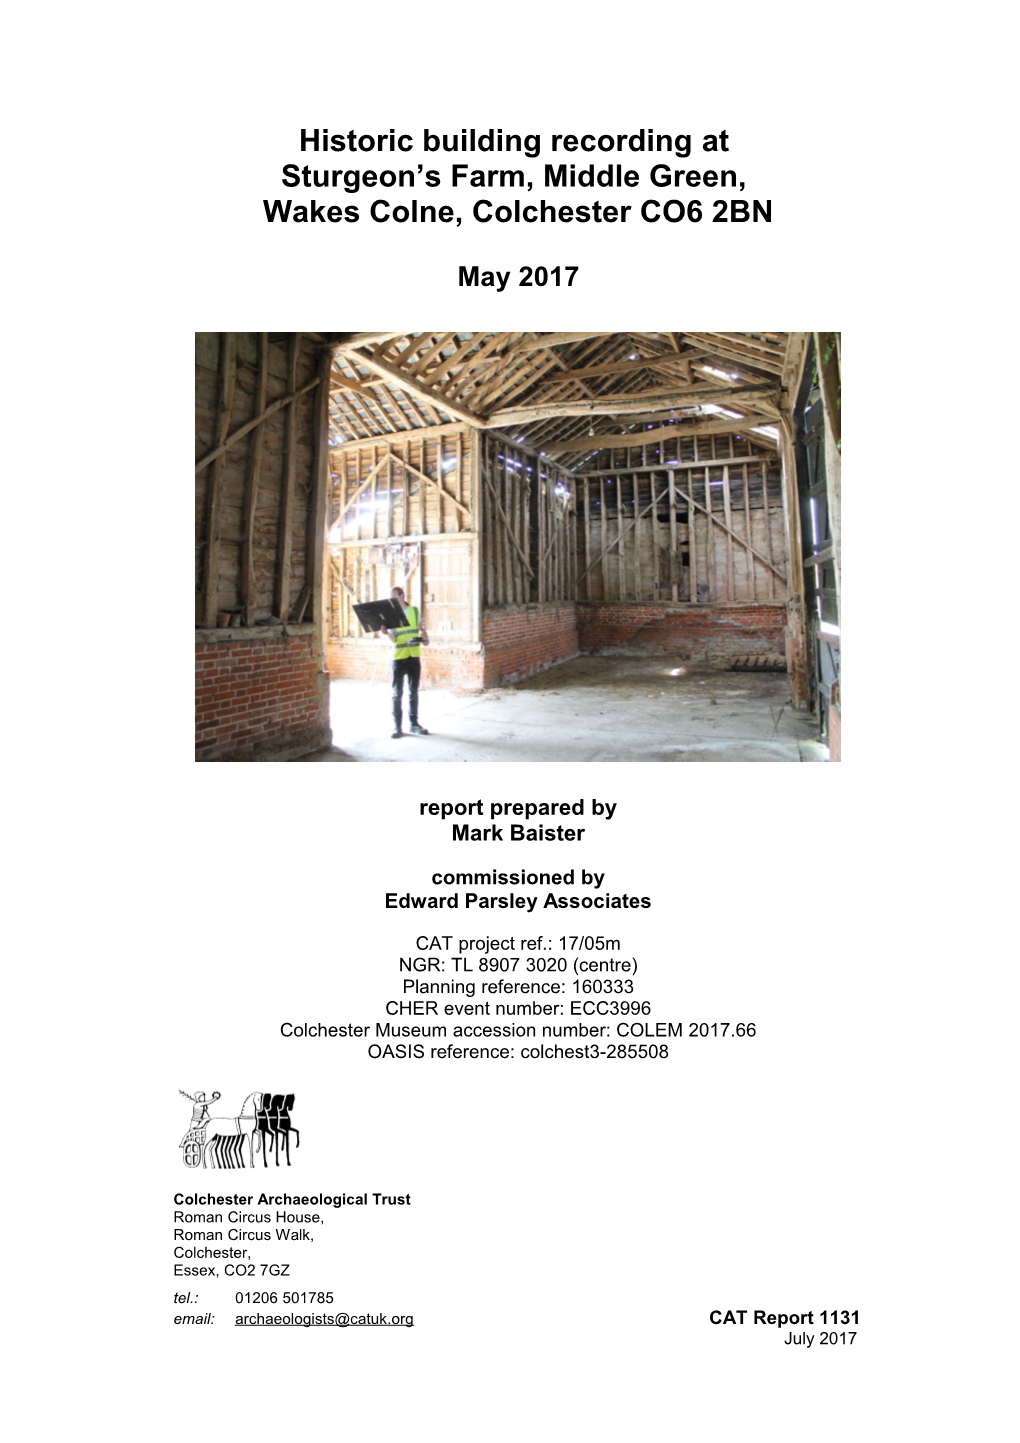 Historic Building Recording at Sturgeon's Farm, Middle Green, Wakes Colne, Colchester CO6 2BN May 2017 Author(S)/Editor(S) Baister, M